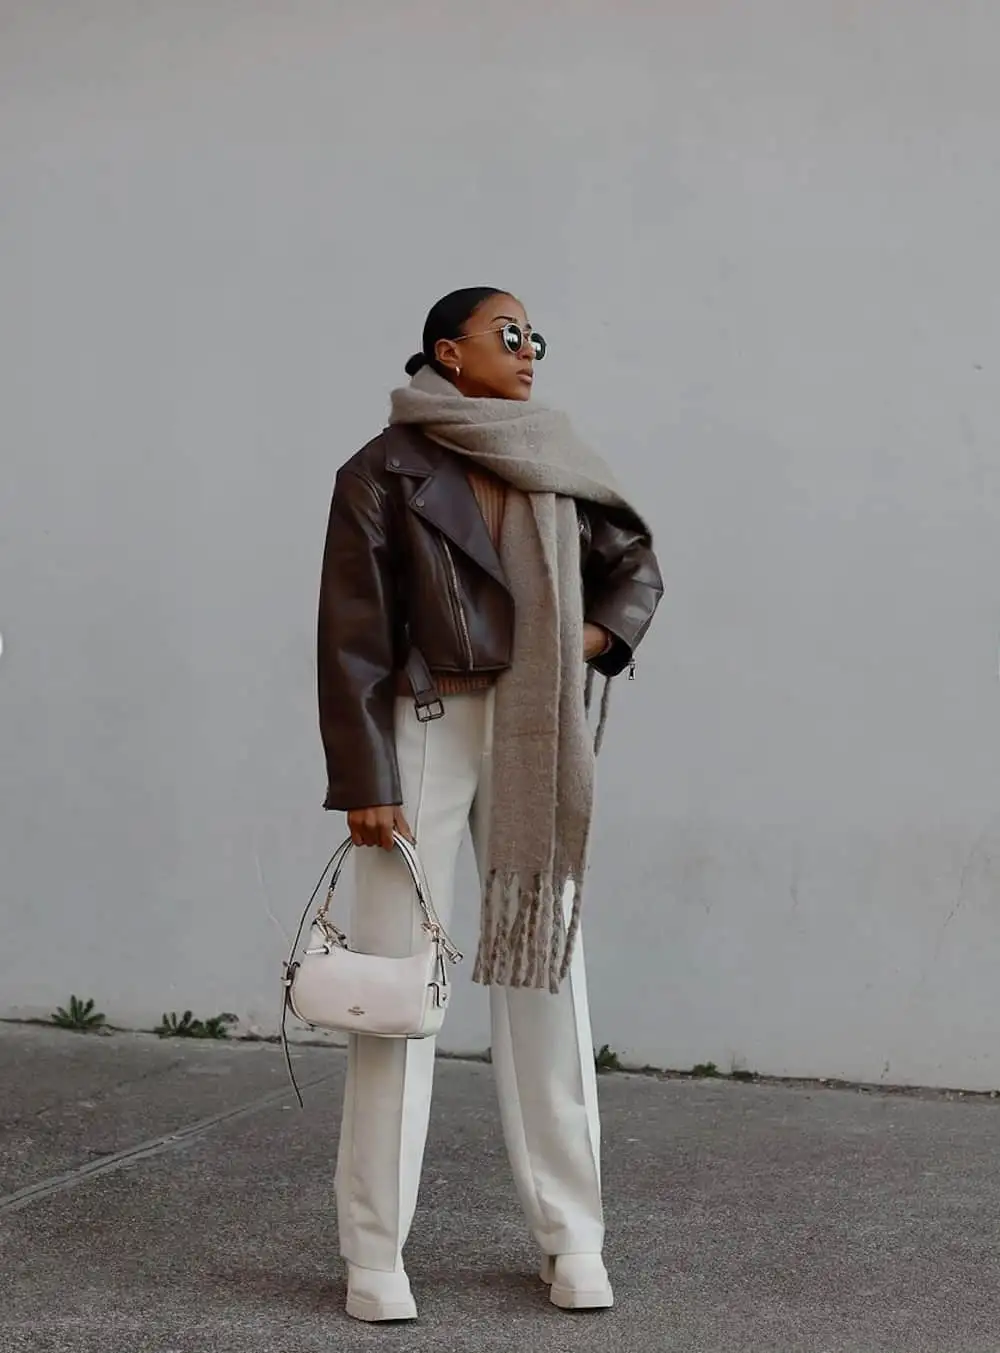 Baddie Winter Outfits: 20 Styles to Keep You Looking Fly and Chic